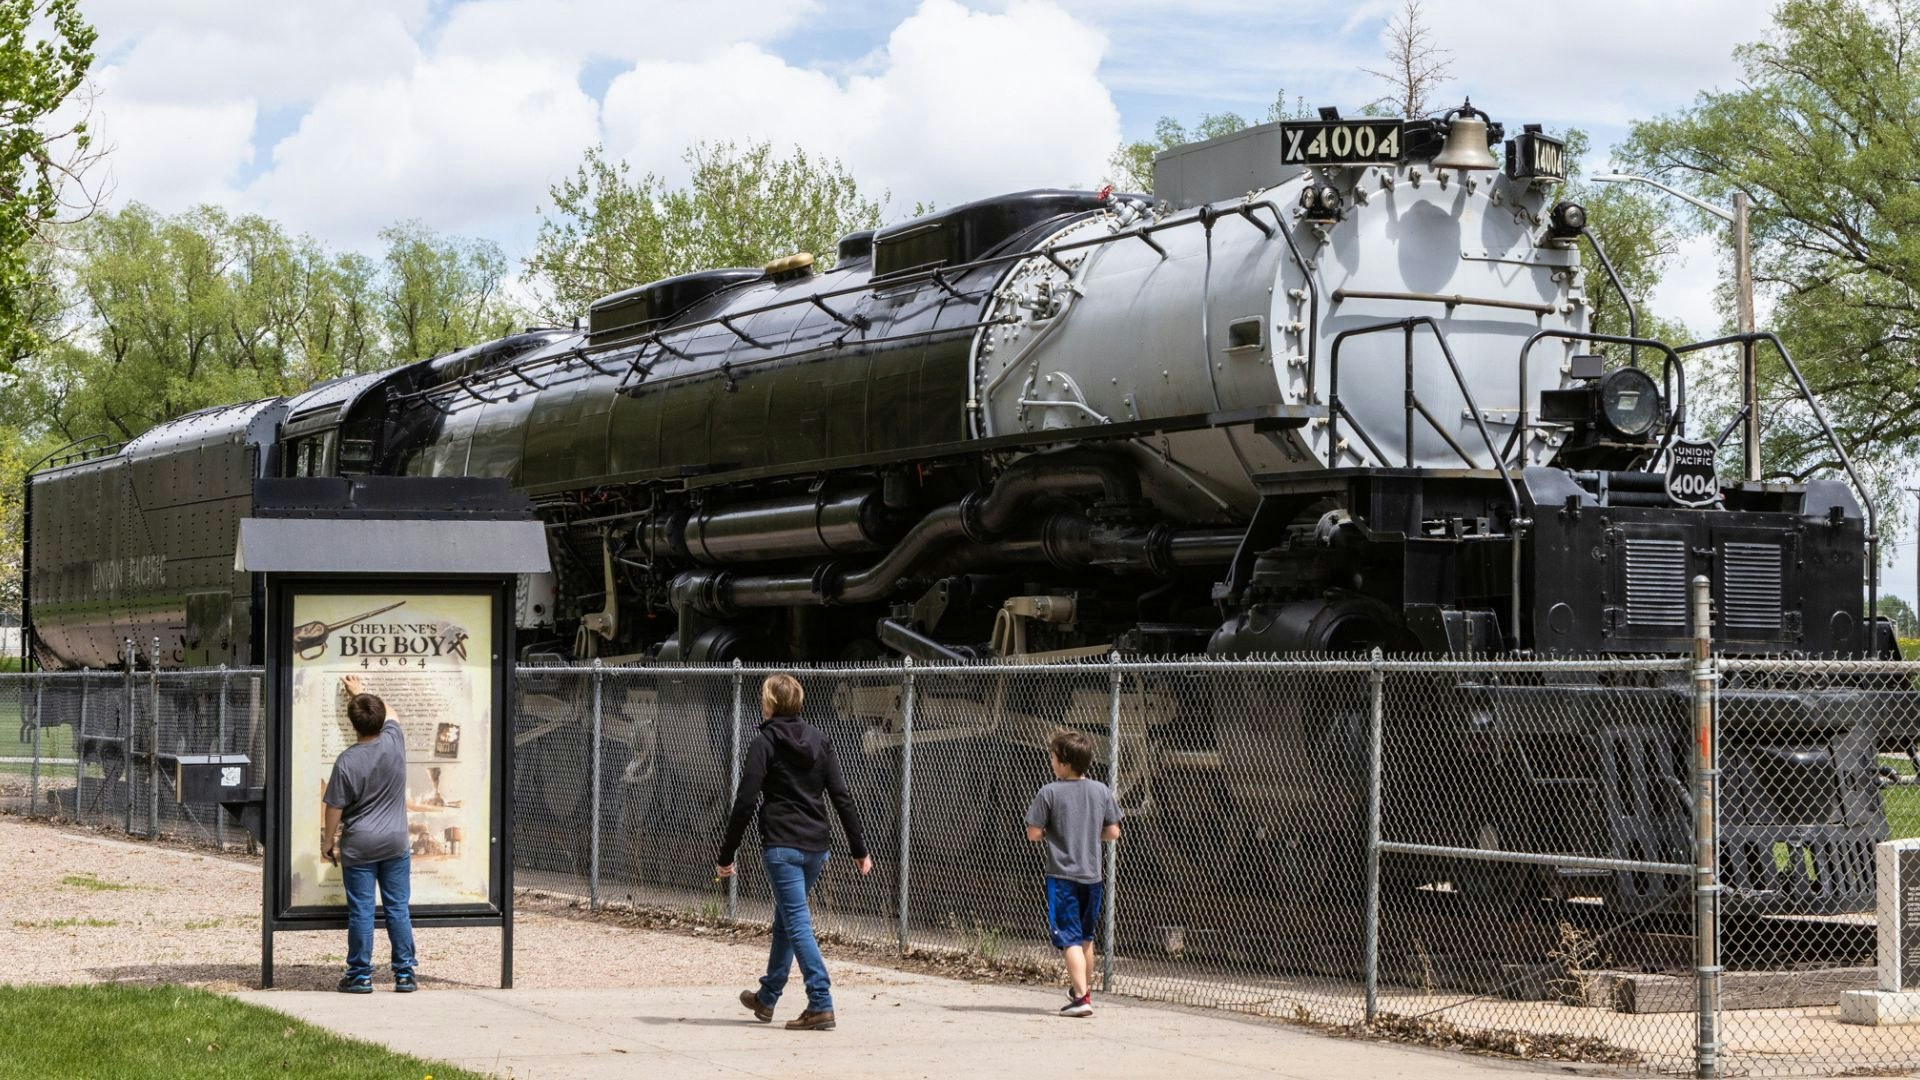 Big Boy 4004, one of 25 of the giant 1.2 million-pound locomotives built in the early 1940s, is on display in Holiday Park in Cheyenne.